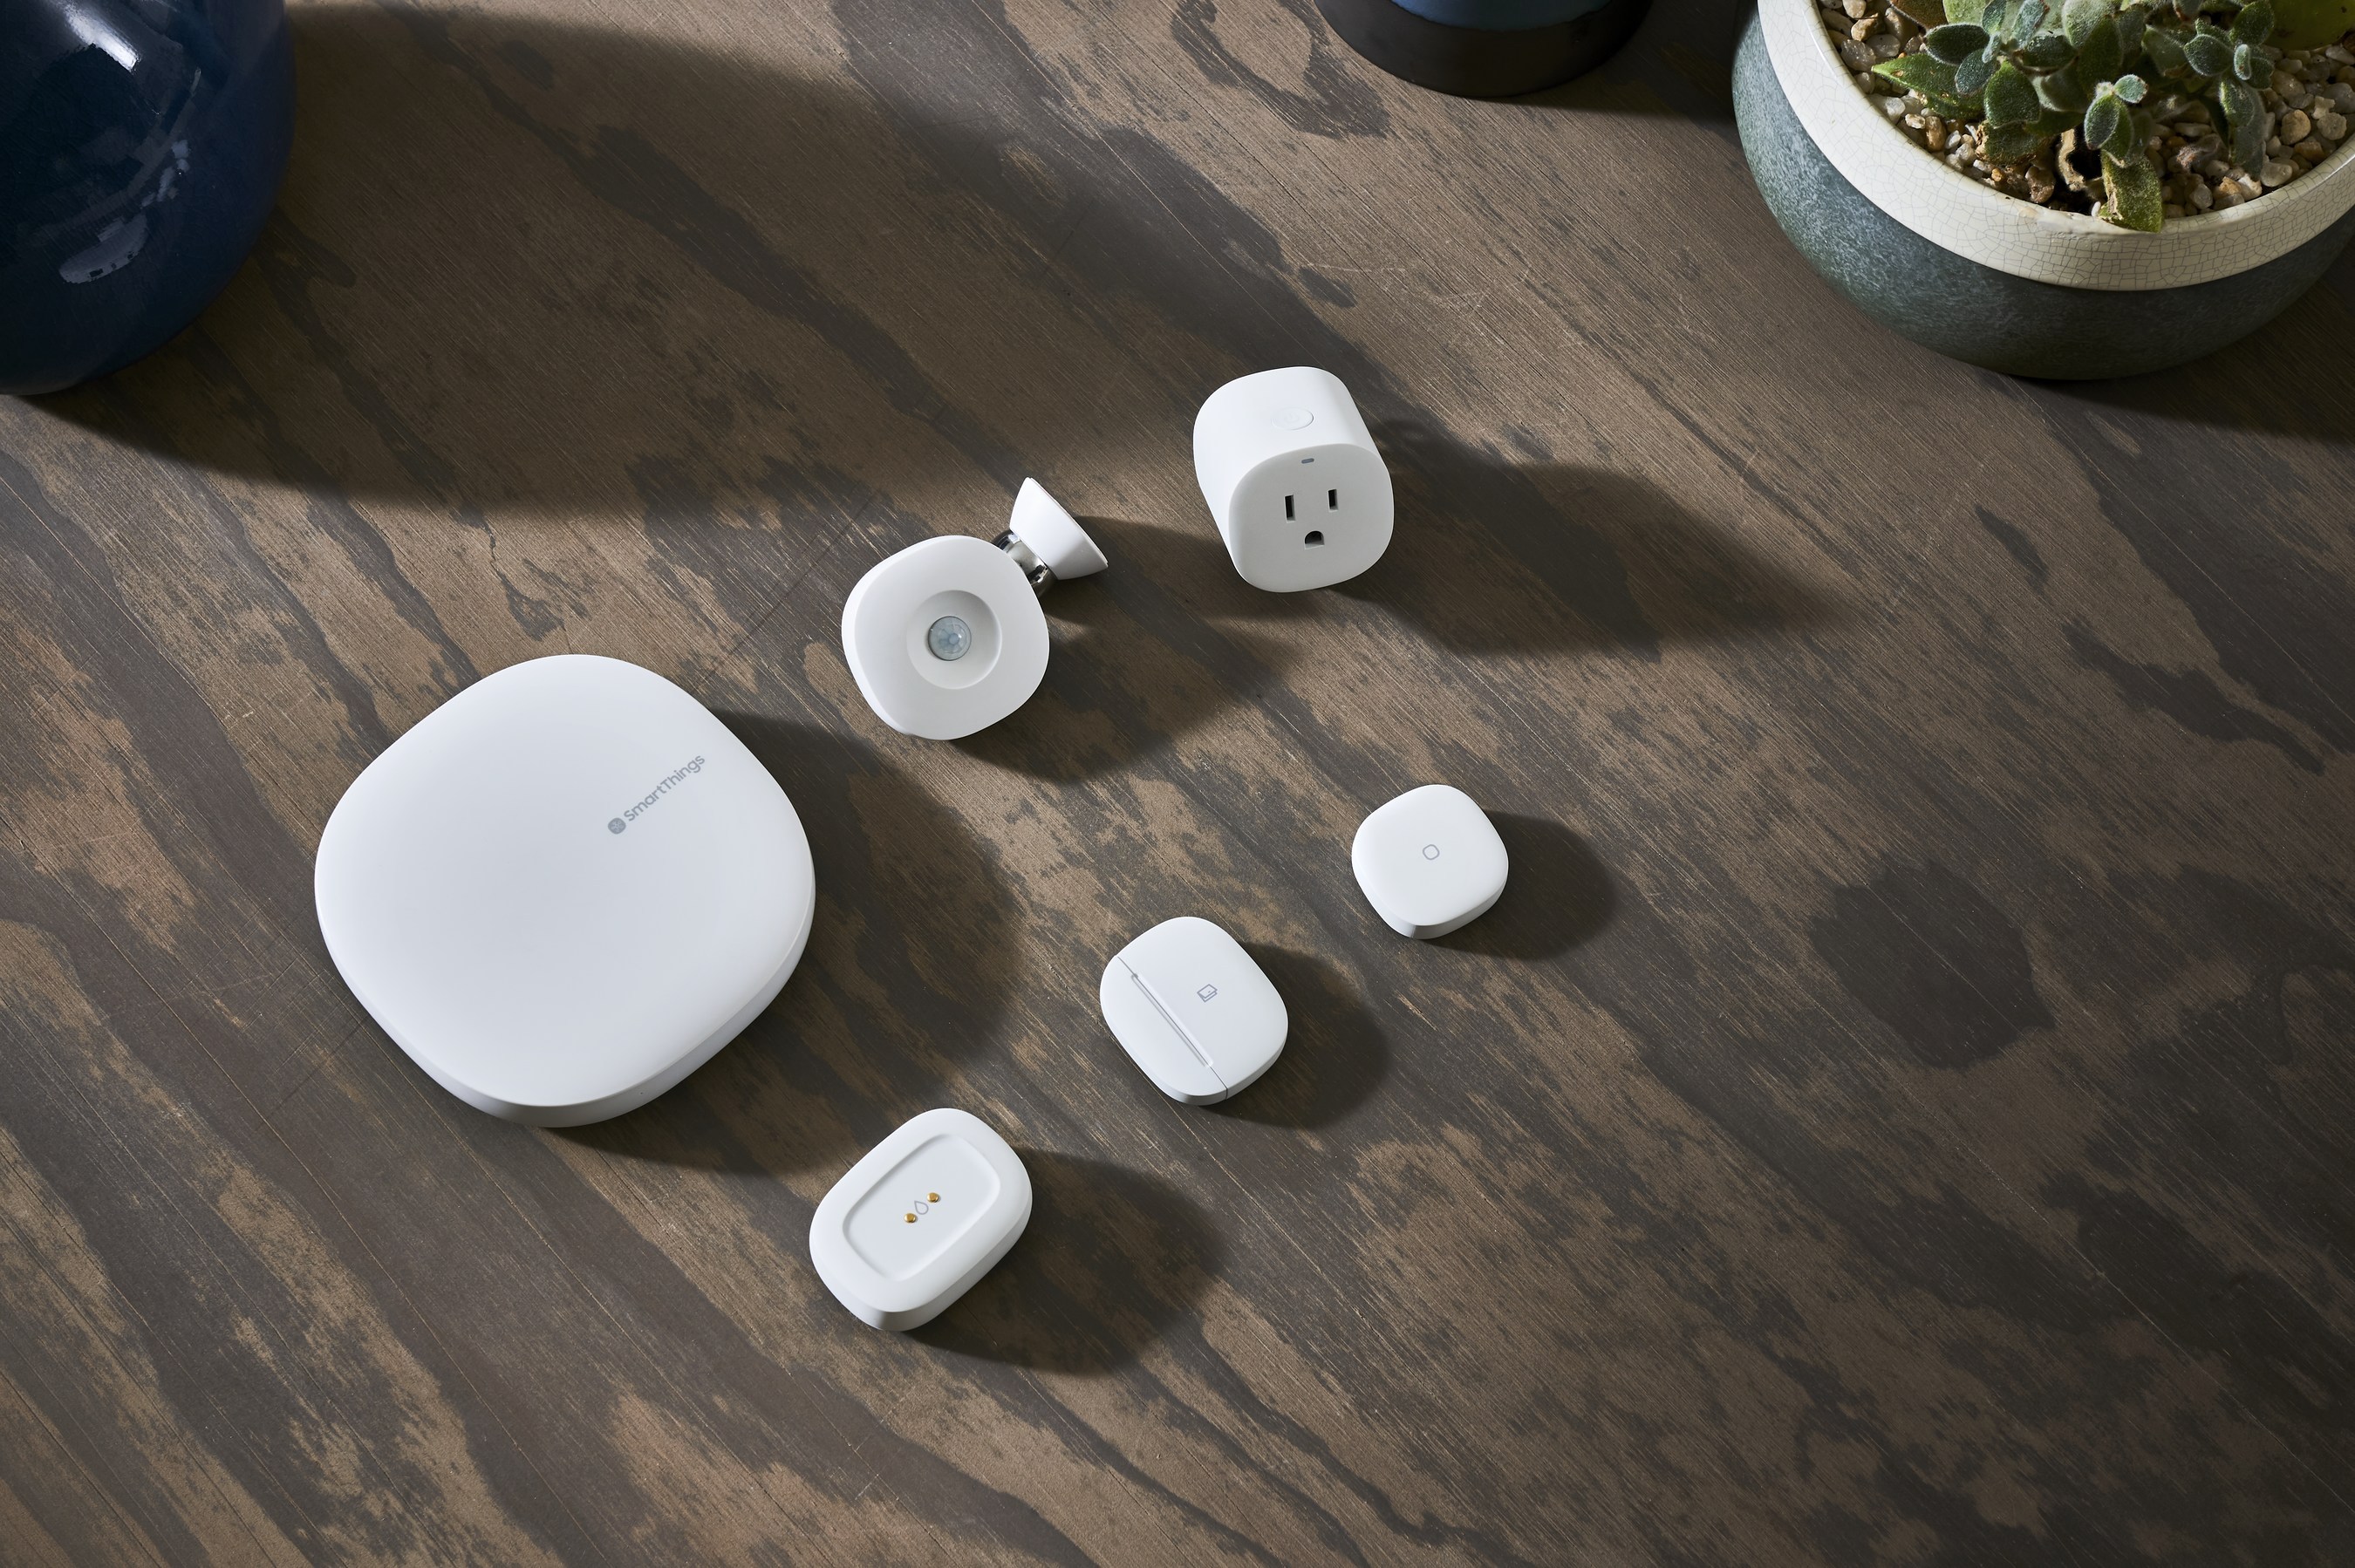 Samsung SmartThings launches in Canada delivering on vision of a true connected home